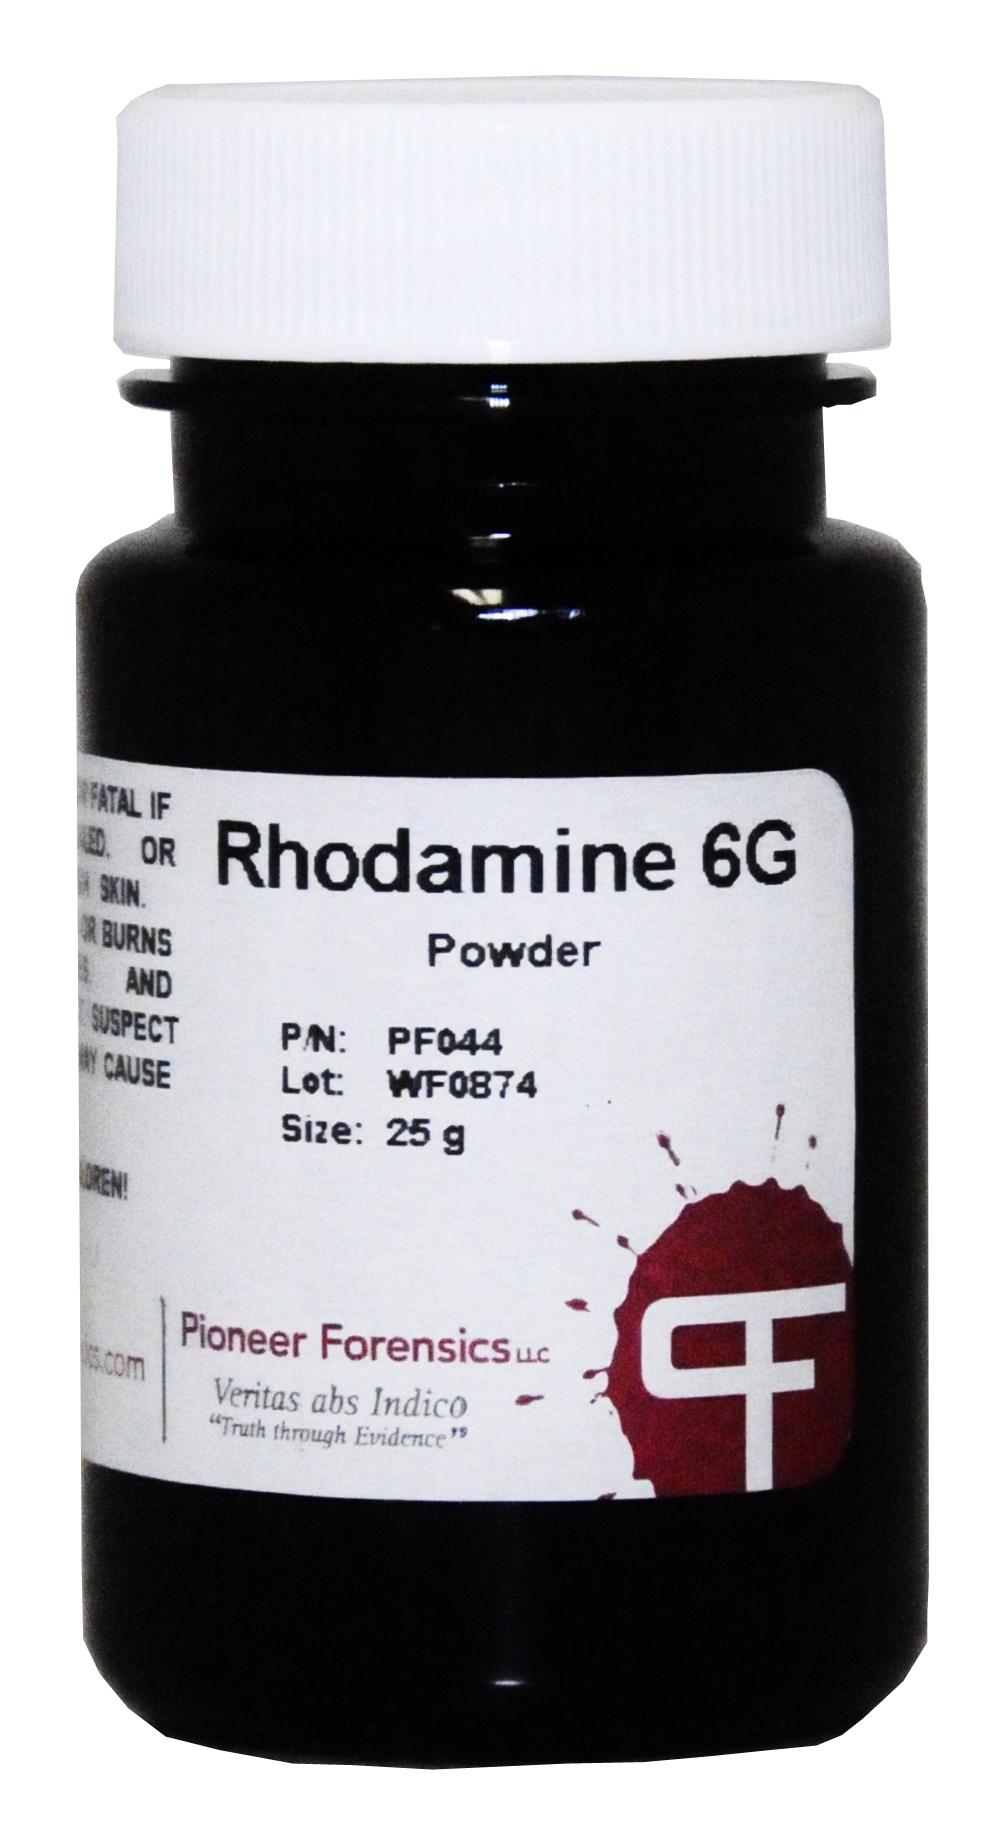 Rhodamine 6G is a dye used with a forensic light source or uv lamp after cyanoacrylate development of latent prints.